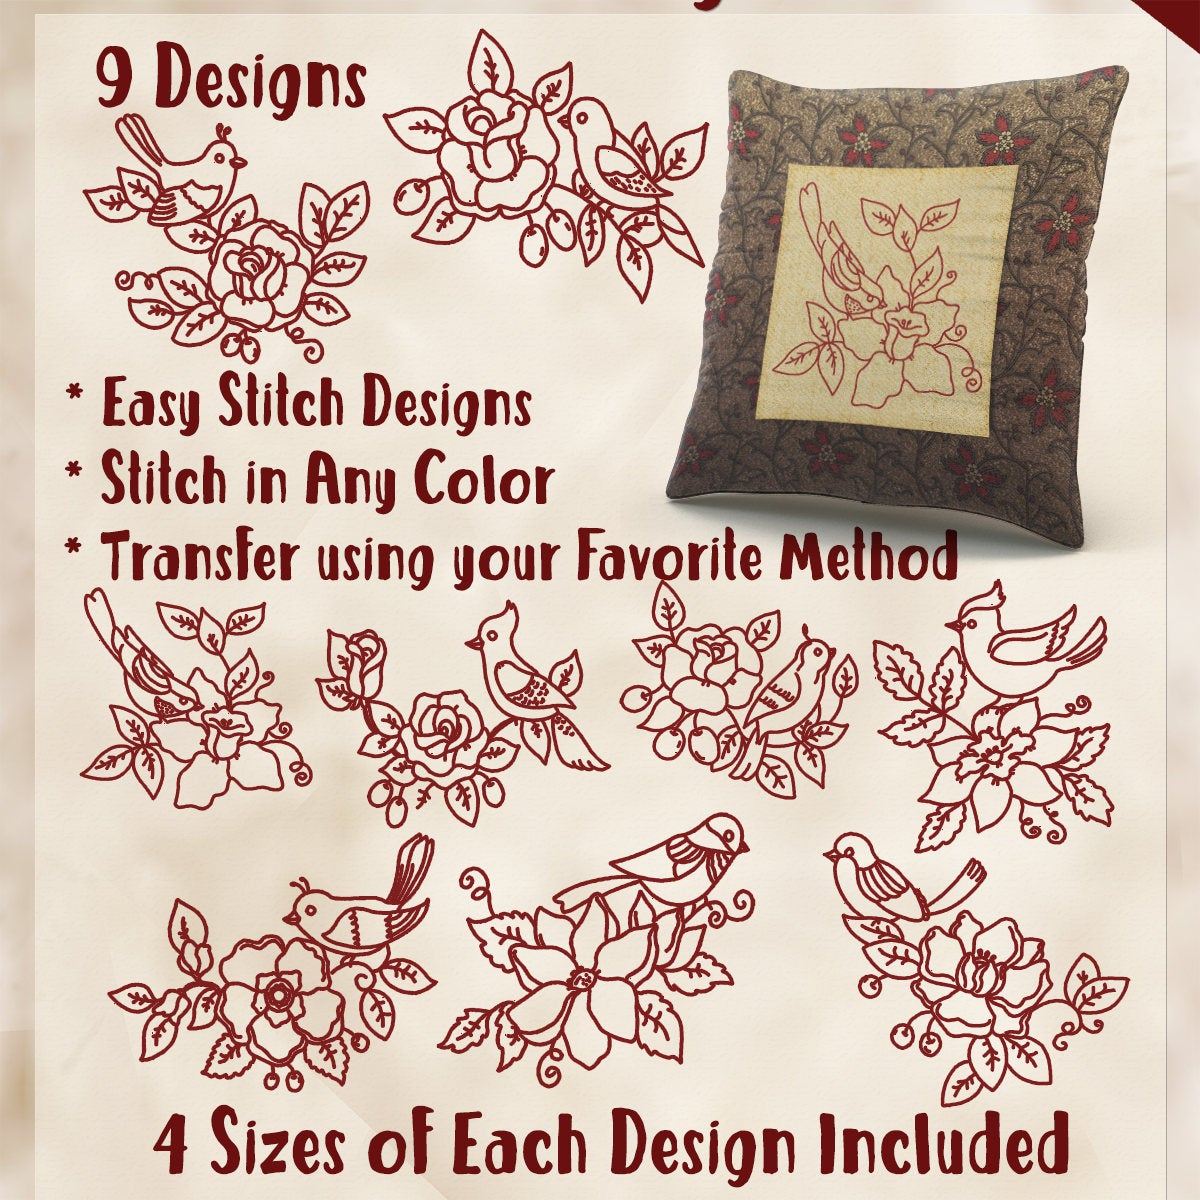 Embroidery Patterns For Sale Sale Hand Embroidery Patterns Birds And Flowers In 4 Sizes Pdf Instant Download 10 Designs For Quilting Embroidery